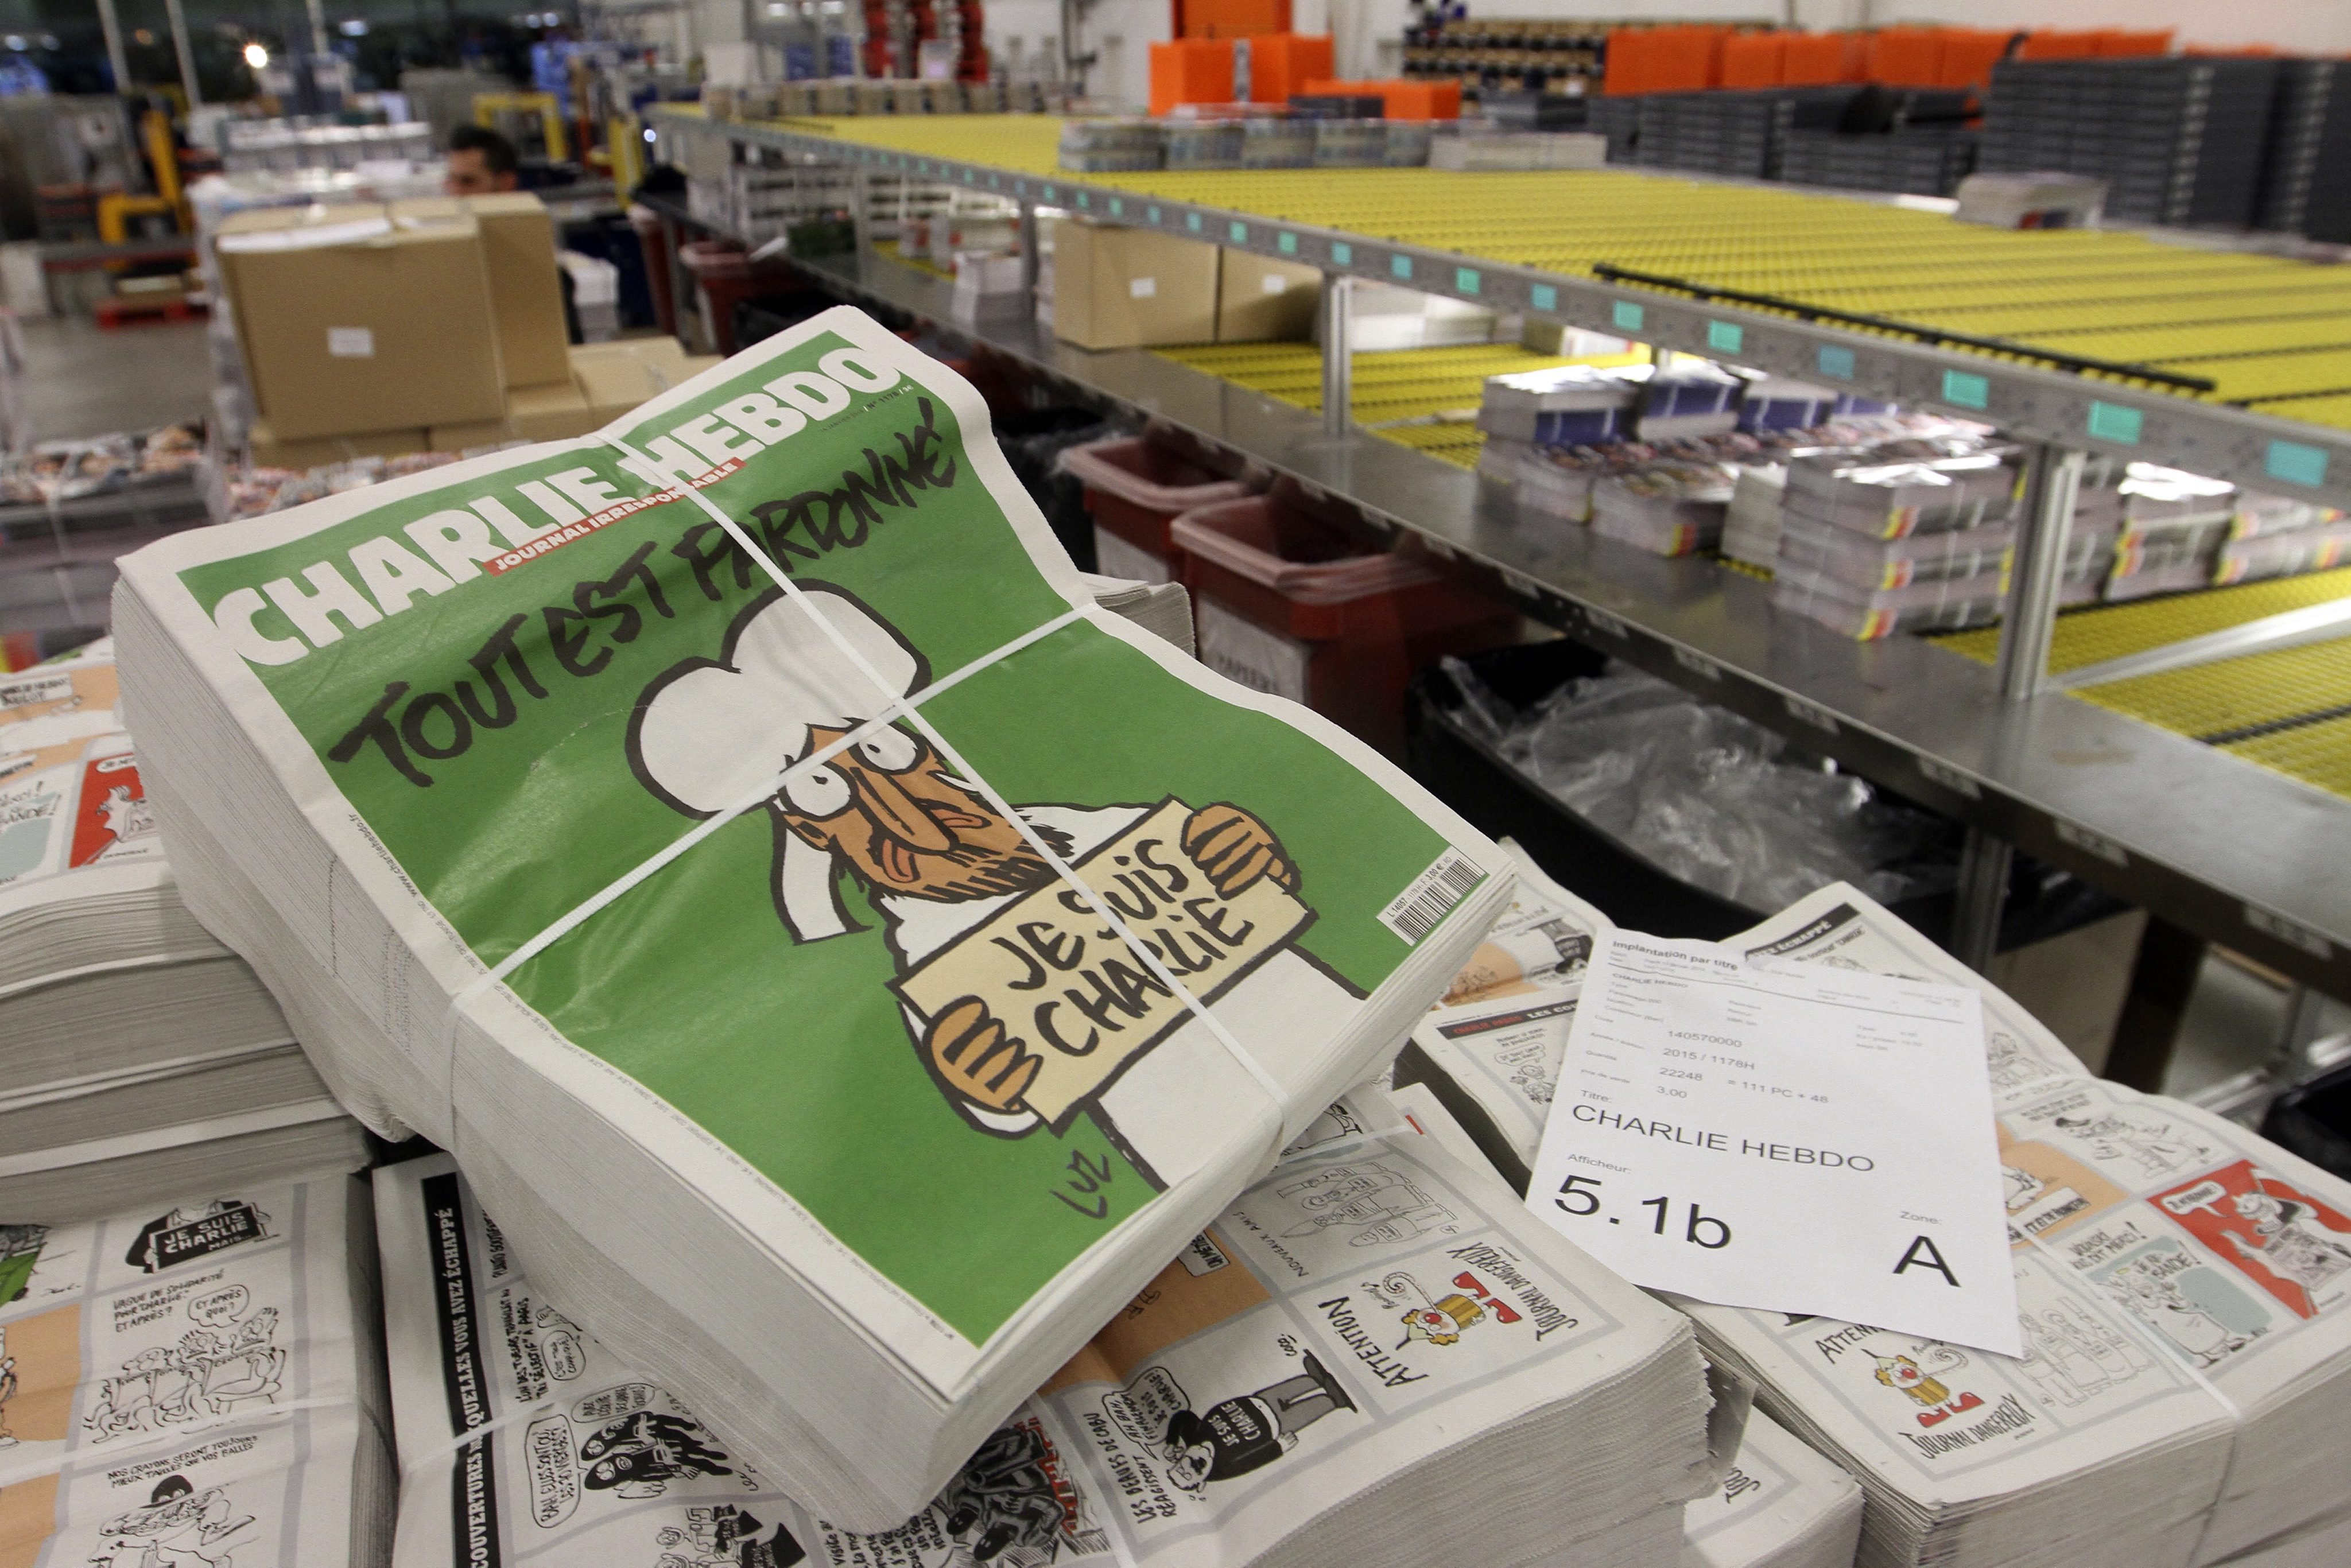 Copies of the upcoming edition of the French satirical magazine 'Charlie Hebdo' are stacked at a distribution centre in Nantes, France, on Jan 13, 2014. (Eddy Lemaistre—EPA)